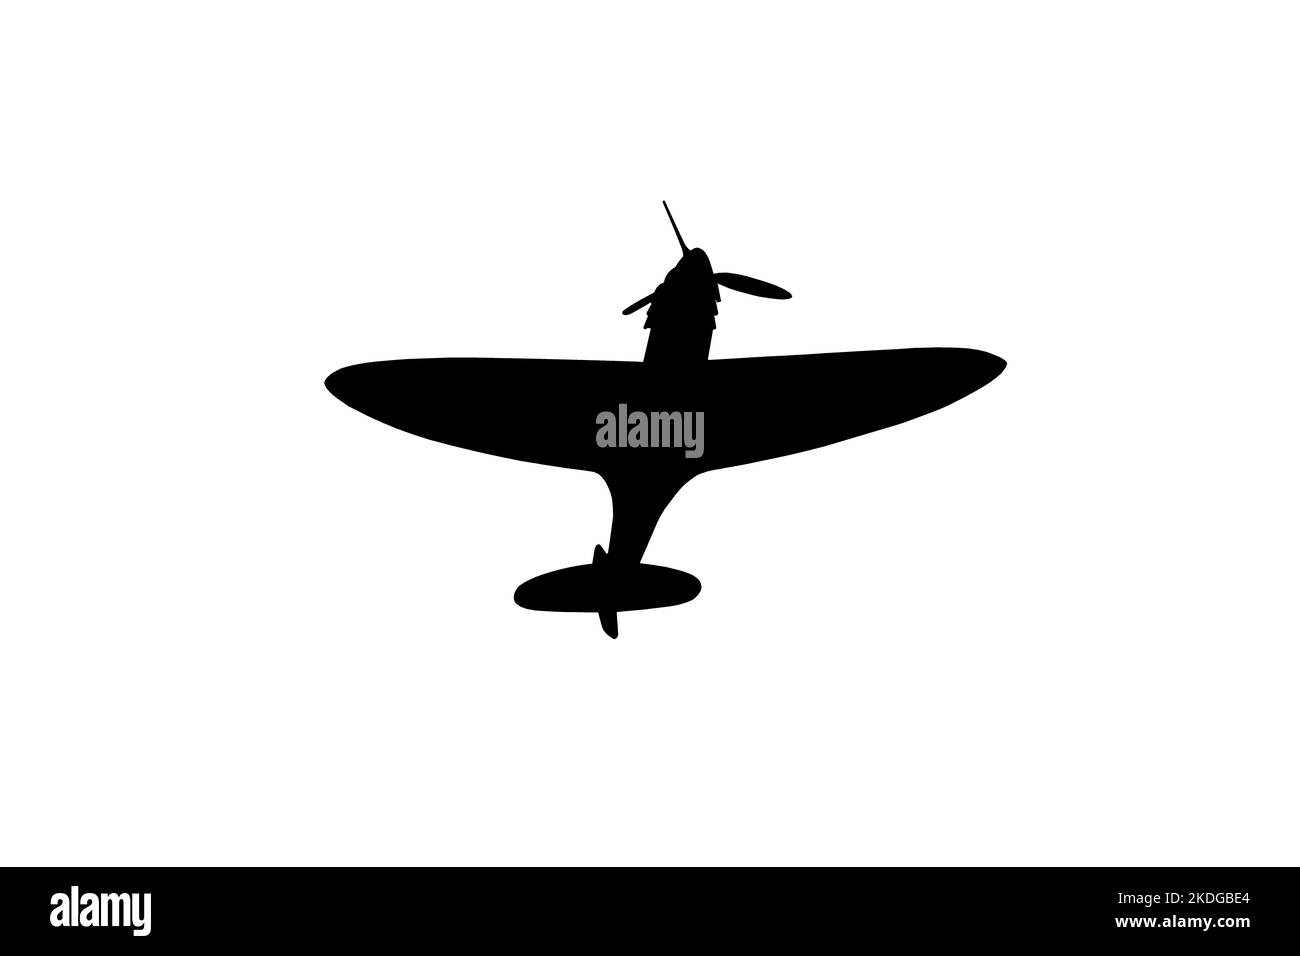 Silhouette of a Supermarine Spitfire flying world war 2 fighter plane icon Stock Photo